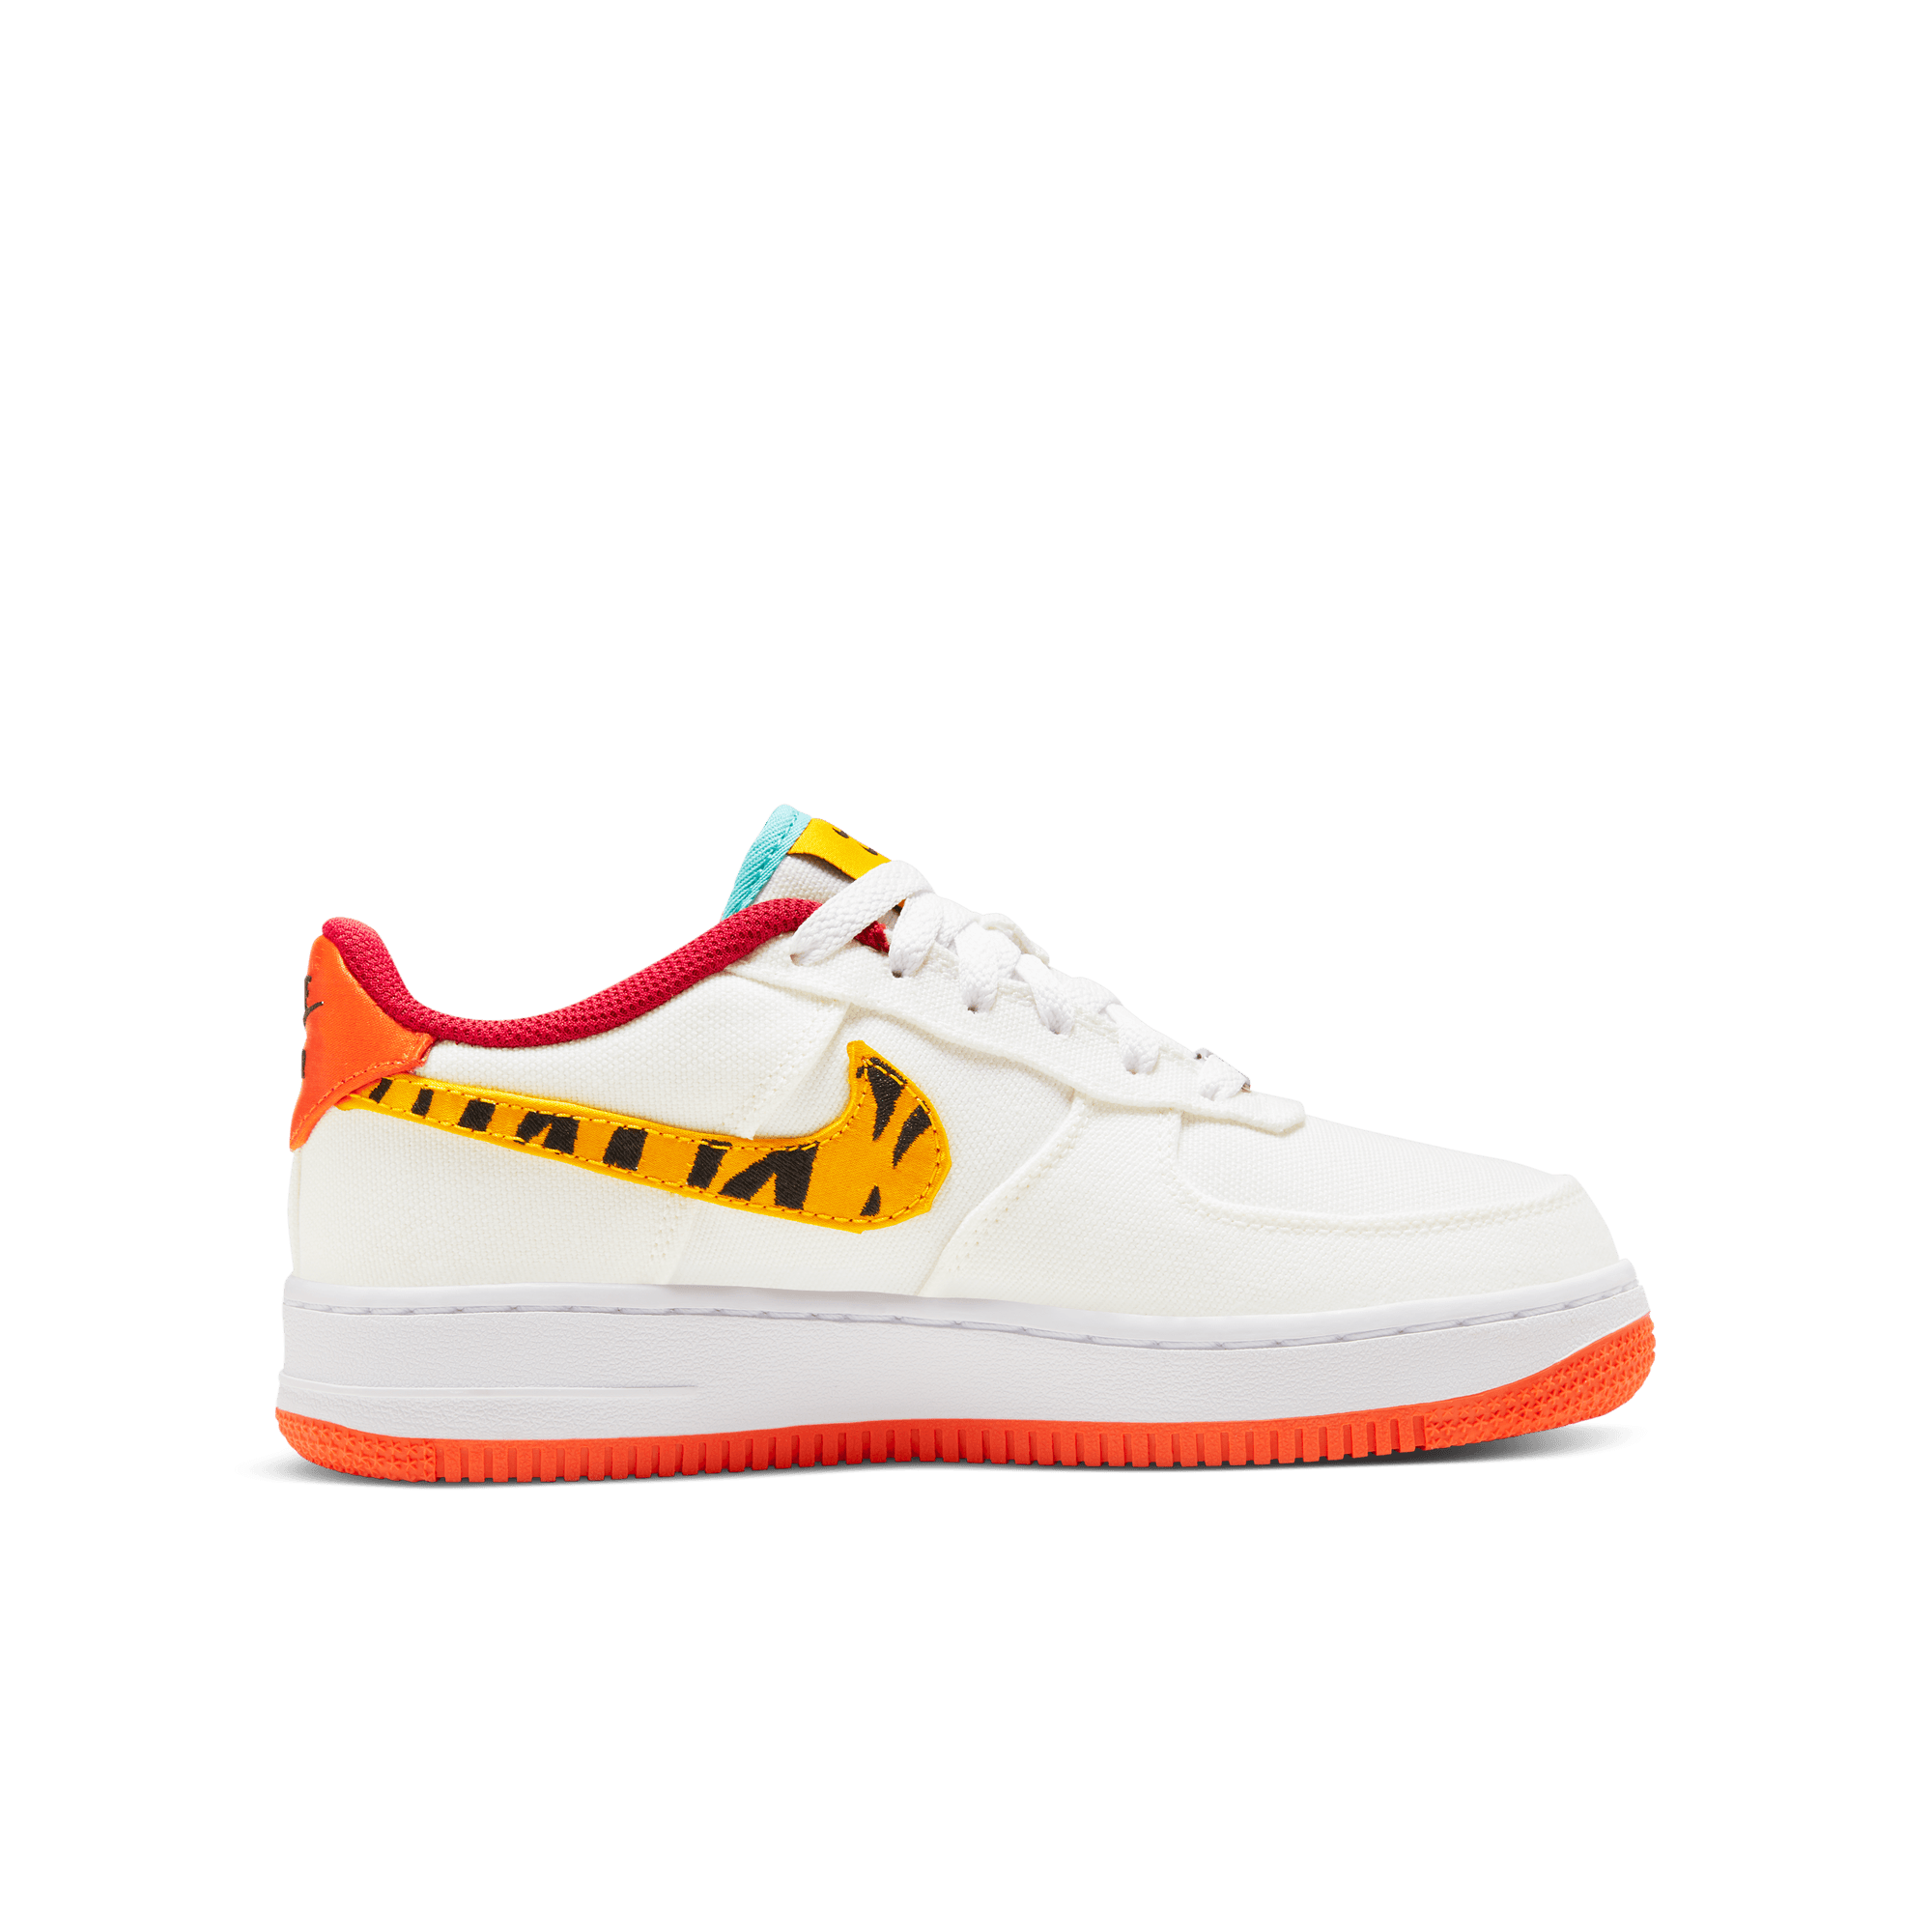 Nike Air Force 1 LV8 - Toddler - GBNY